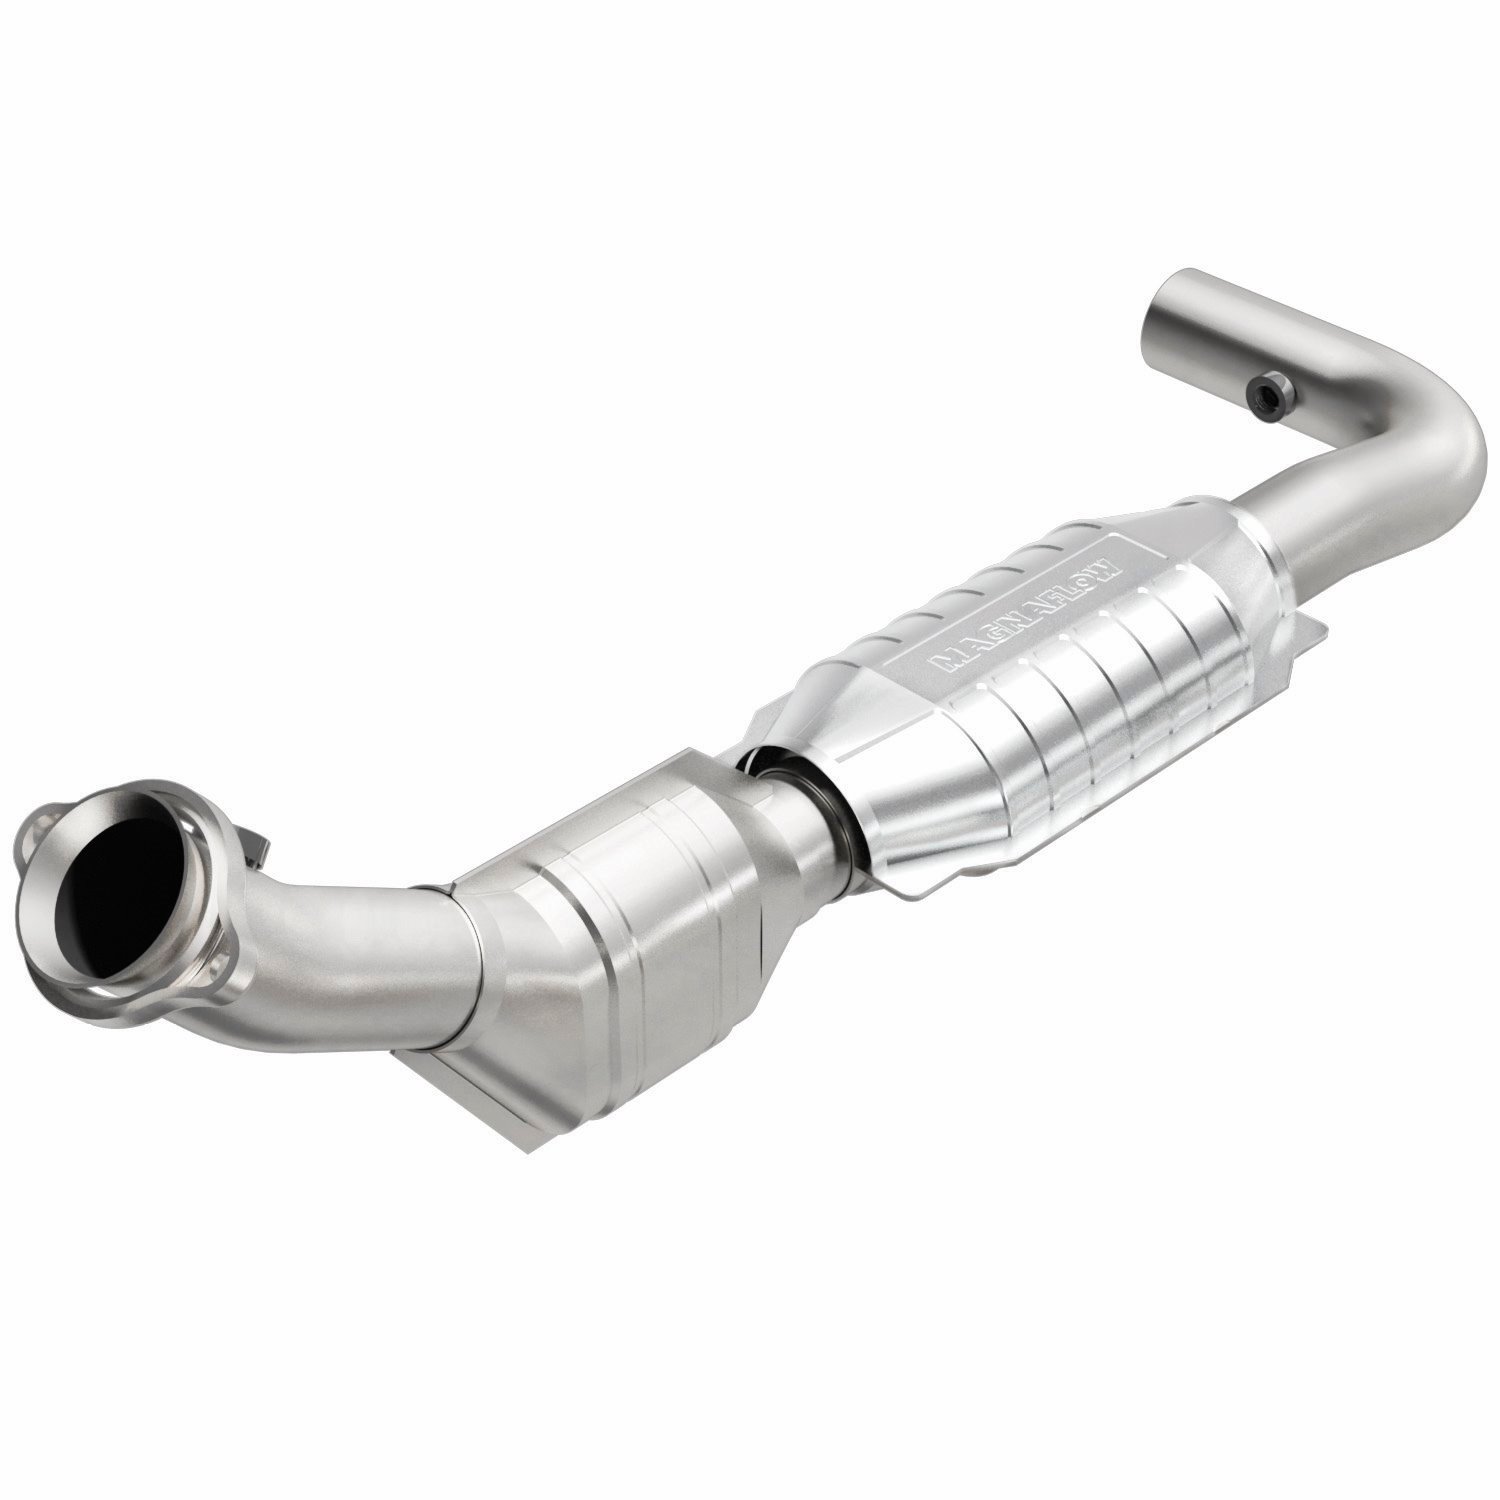 Direct-Fit Catalytic Converter 1999-2000 F-250/Expedition & Navigator 5.4L